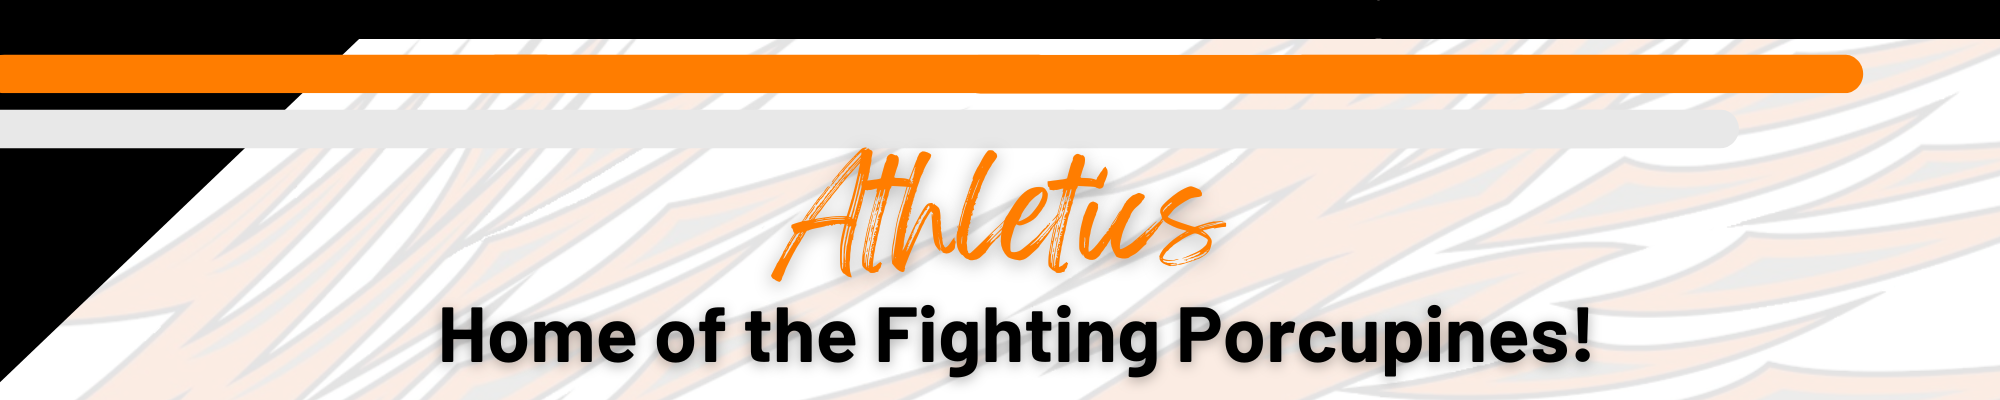 Athletics - Home of the Fighting Porcupines